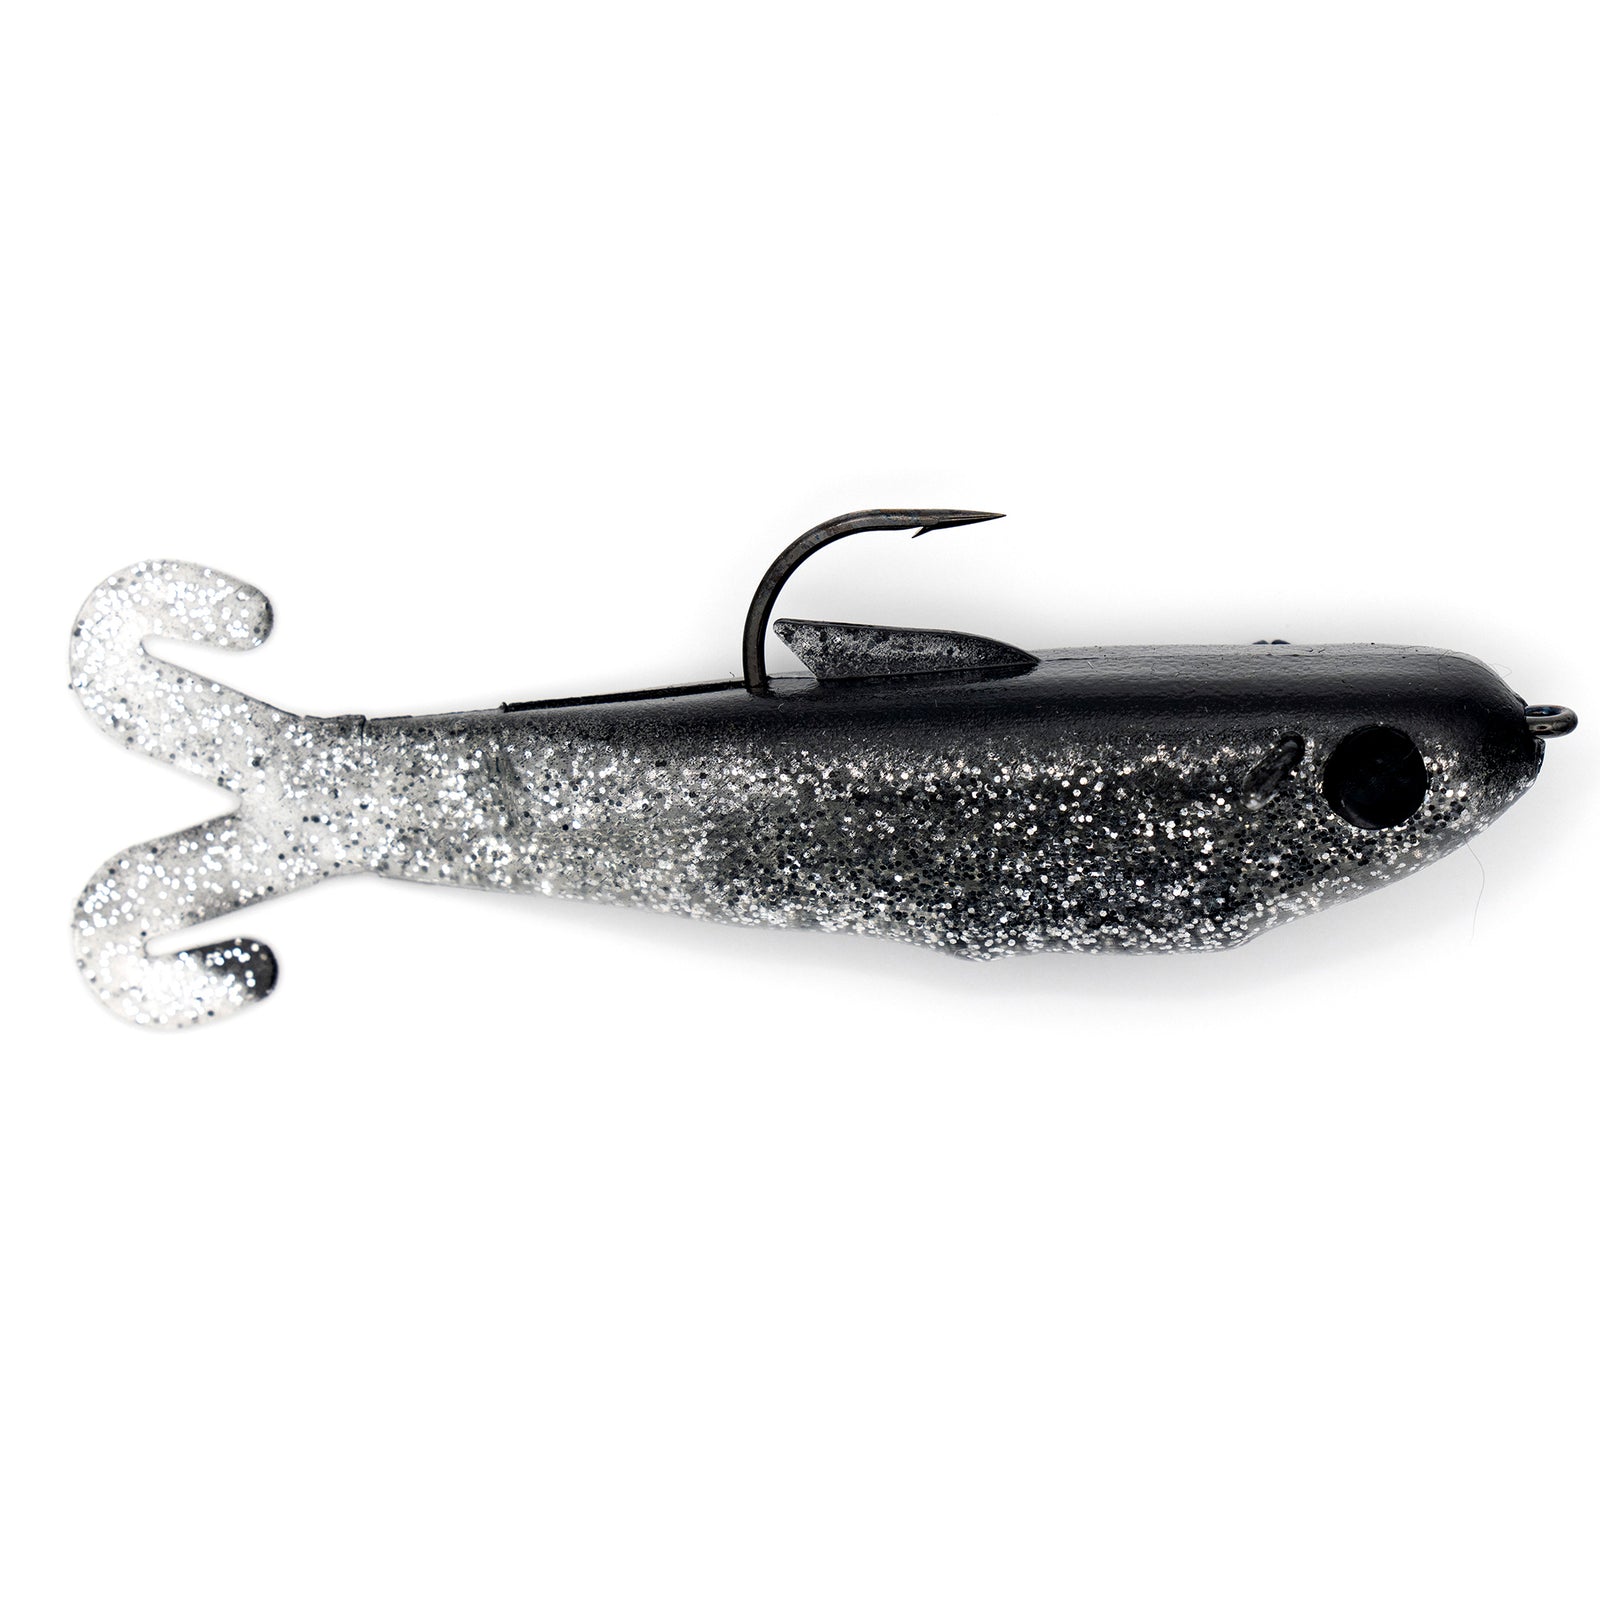 DOA Lures Trolling Bait Buster – Crook and Crook Fishing, Electronics, and  Marine Supplies